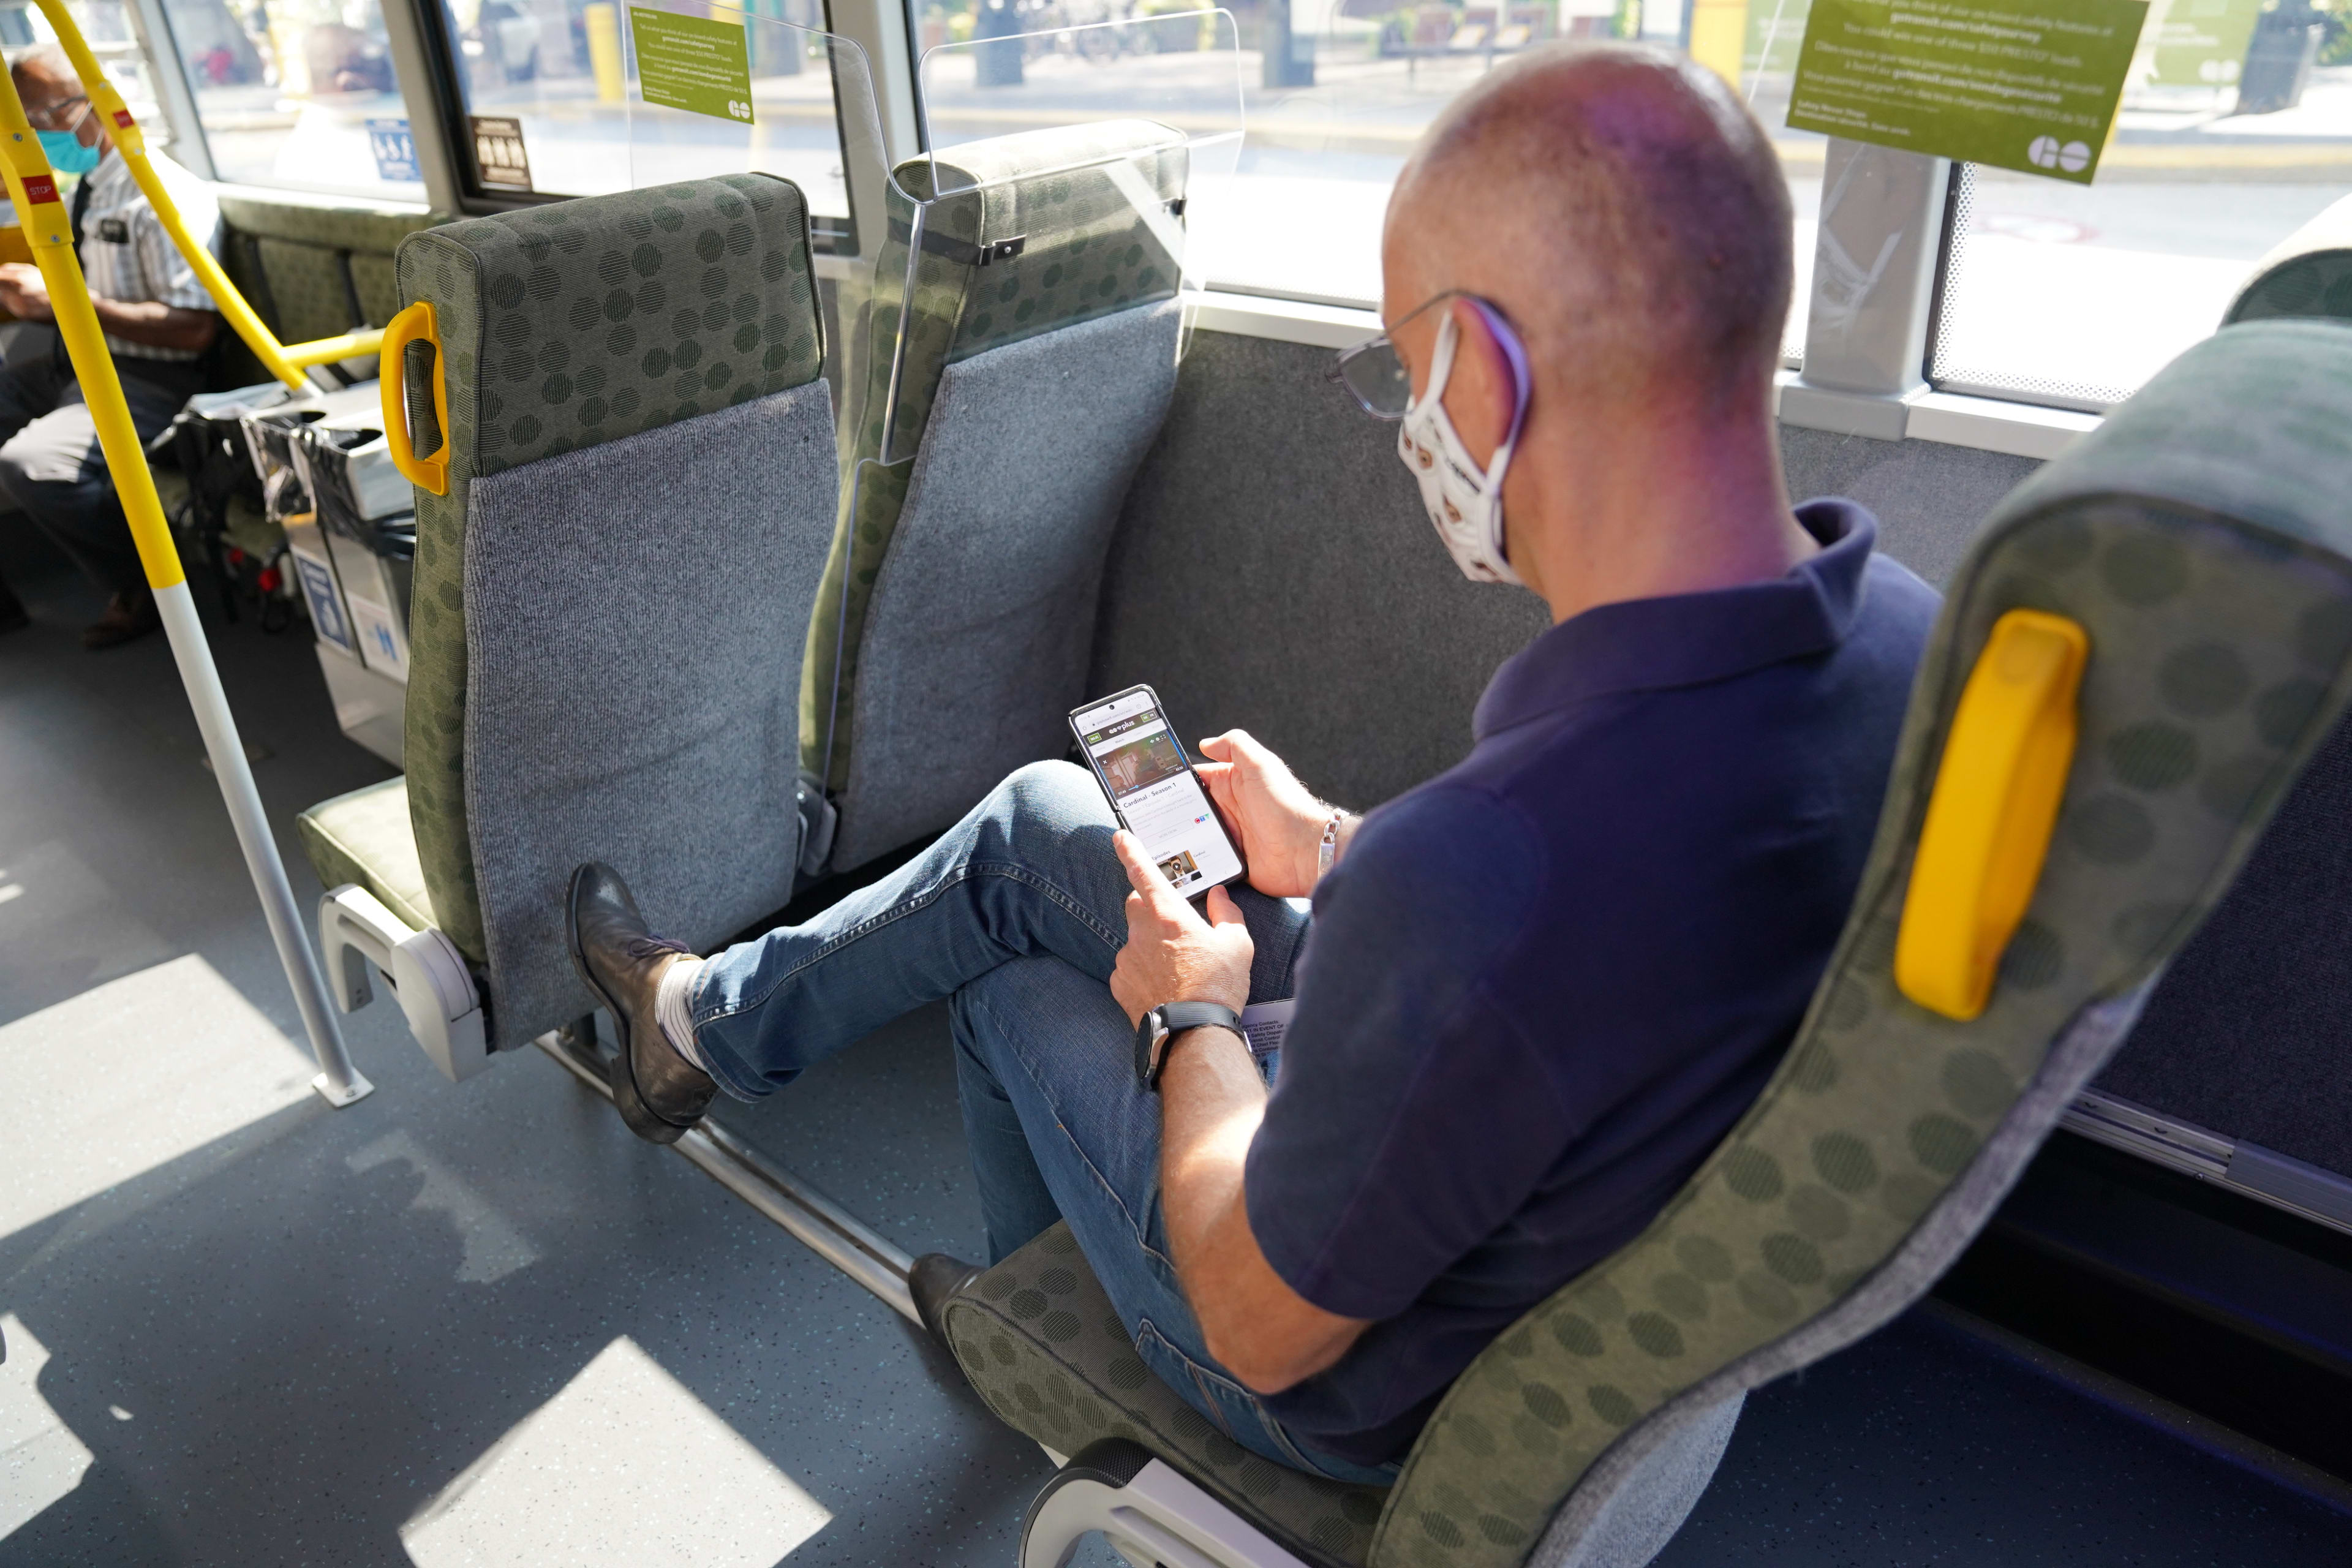 A man sits on a GO bus and looks at his phone.